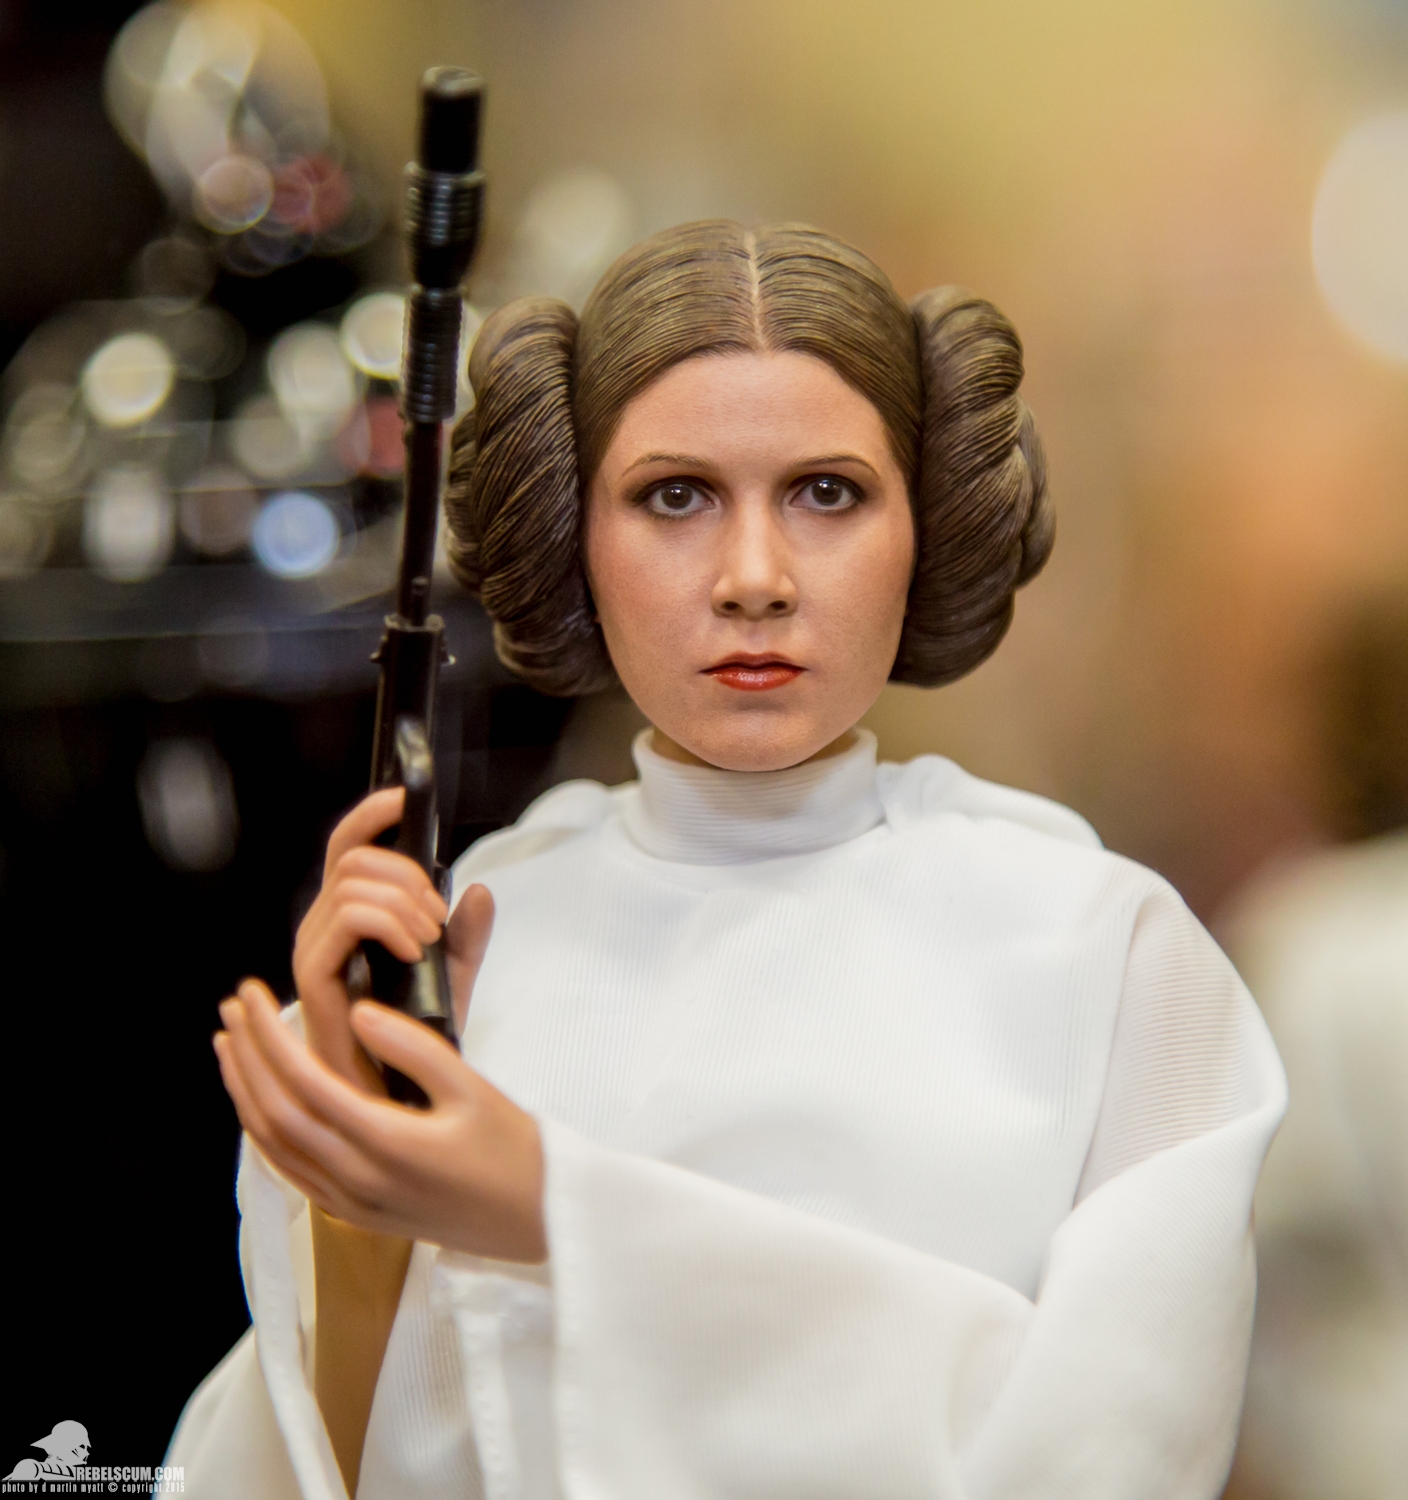 http://www.rebelscum.com/2015-SDCC/Hot-Toys-Display-2015-San-Diego-Comic-Con-SDCC/Hot-Toys-Display-2015-San-Diego-Comic-Con-SDCC-027.jpg